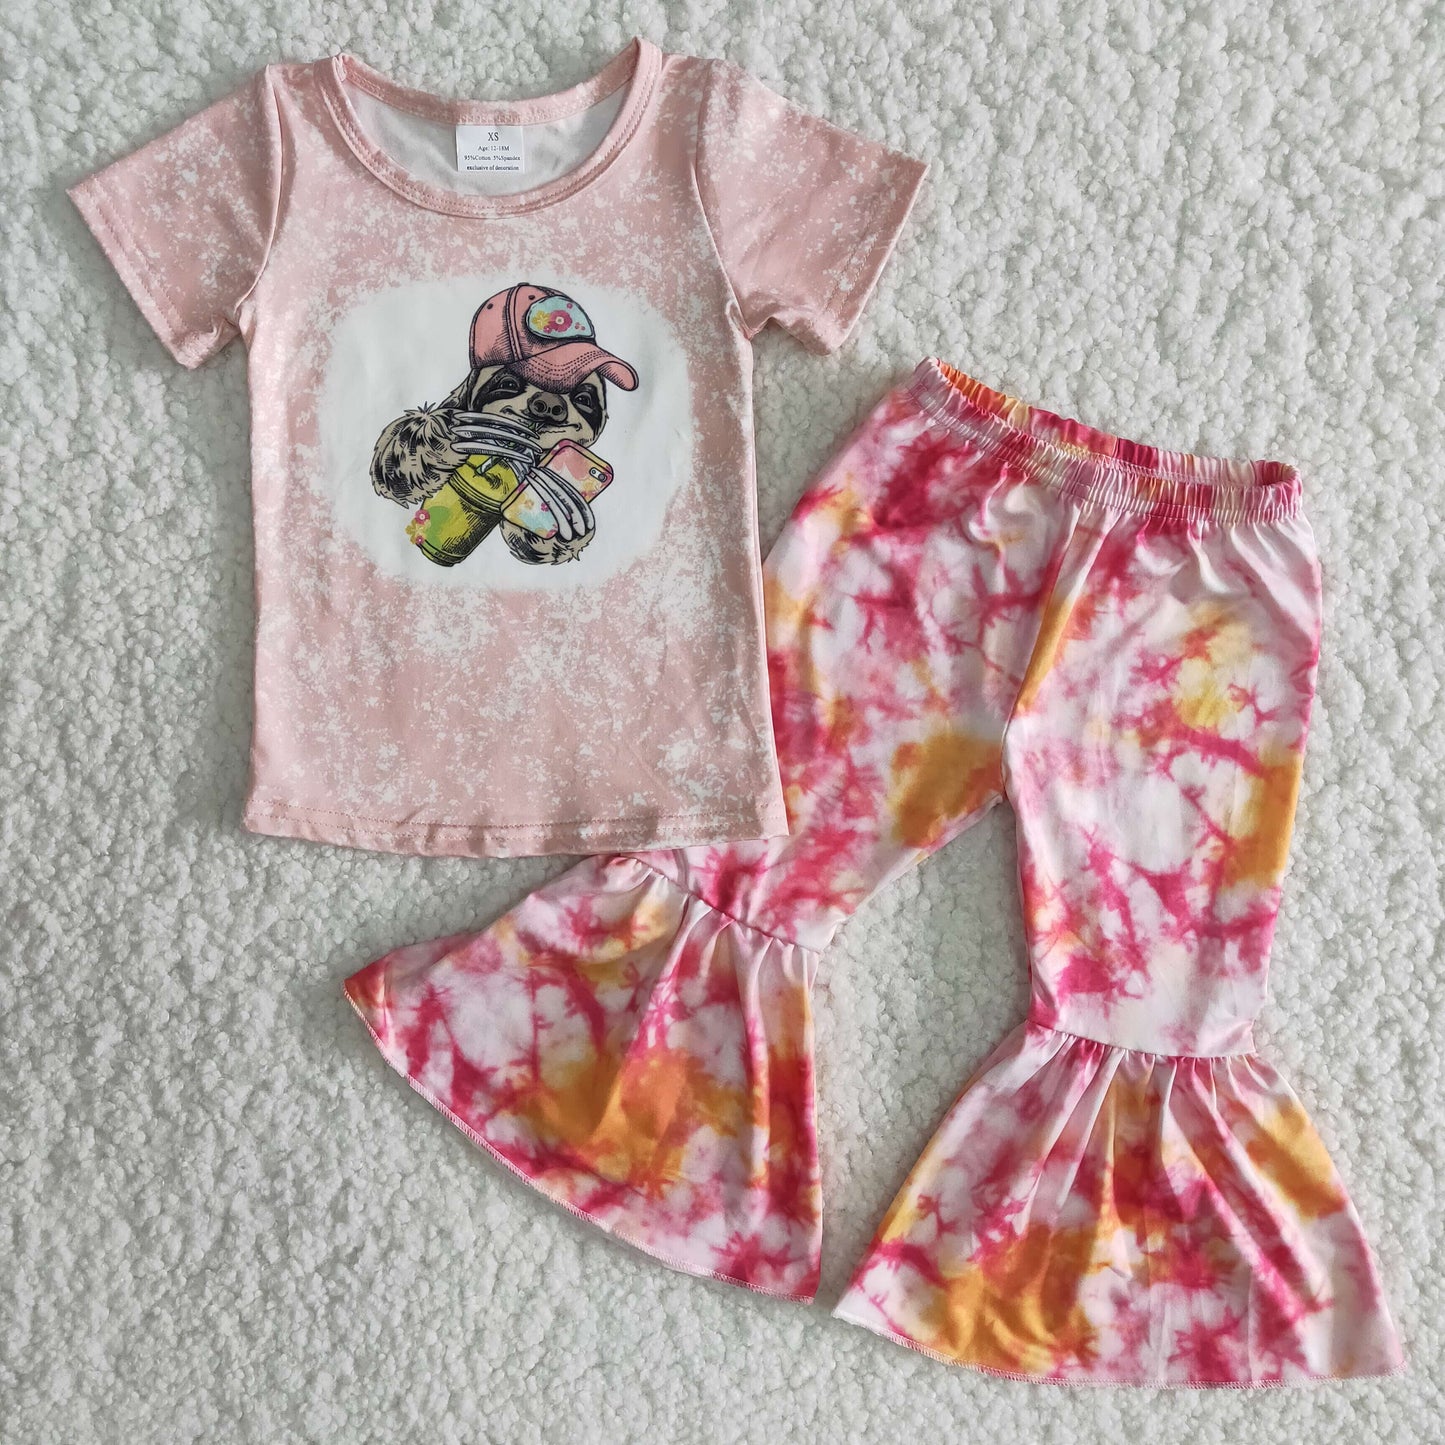 Promotion baby girls pink summer outfits